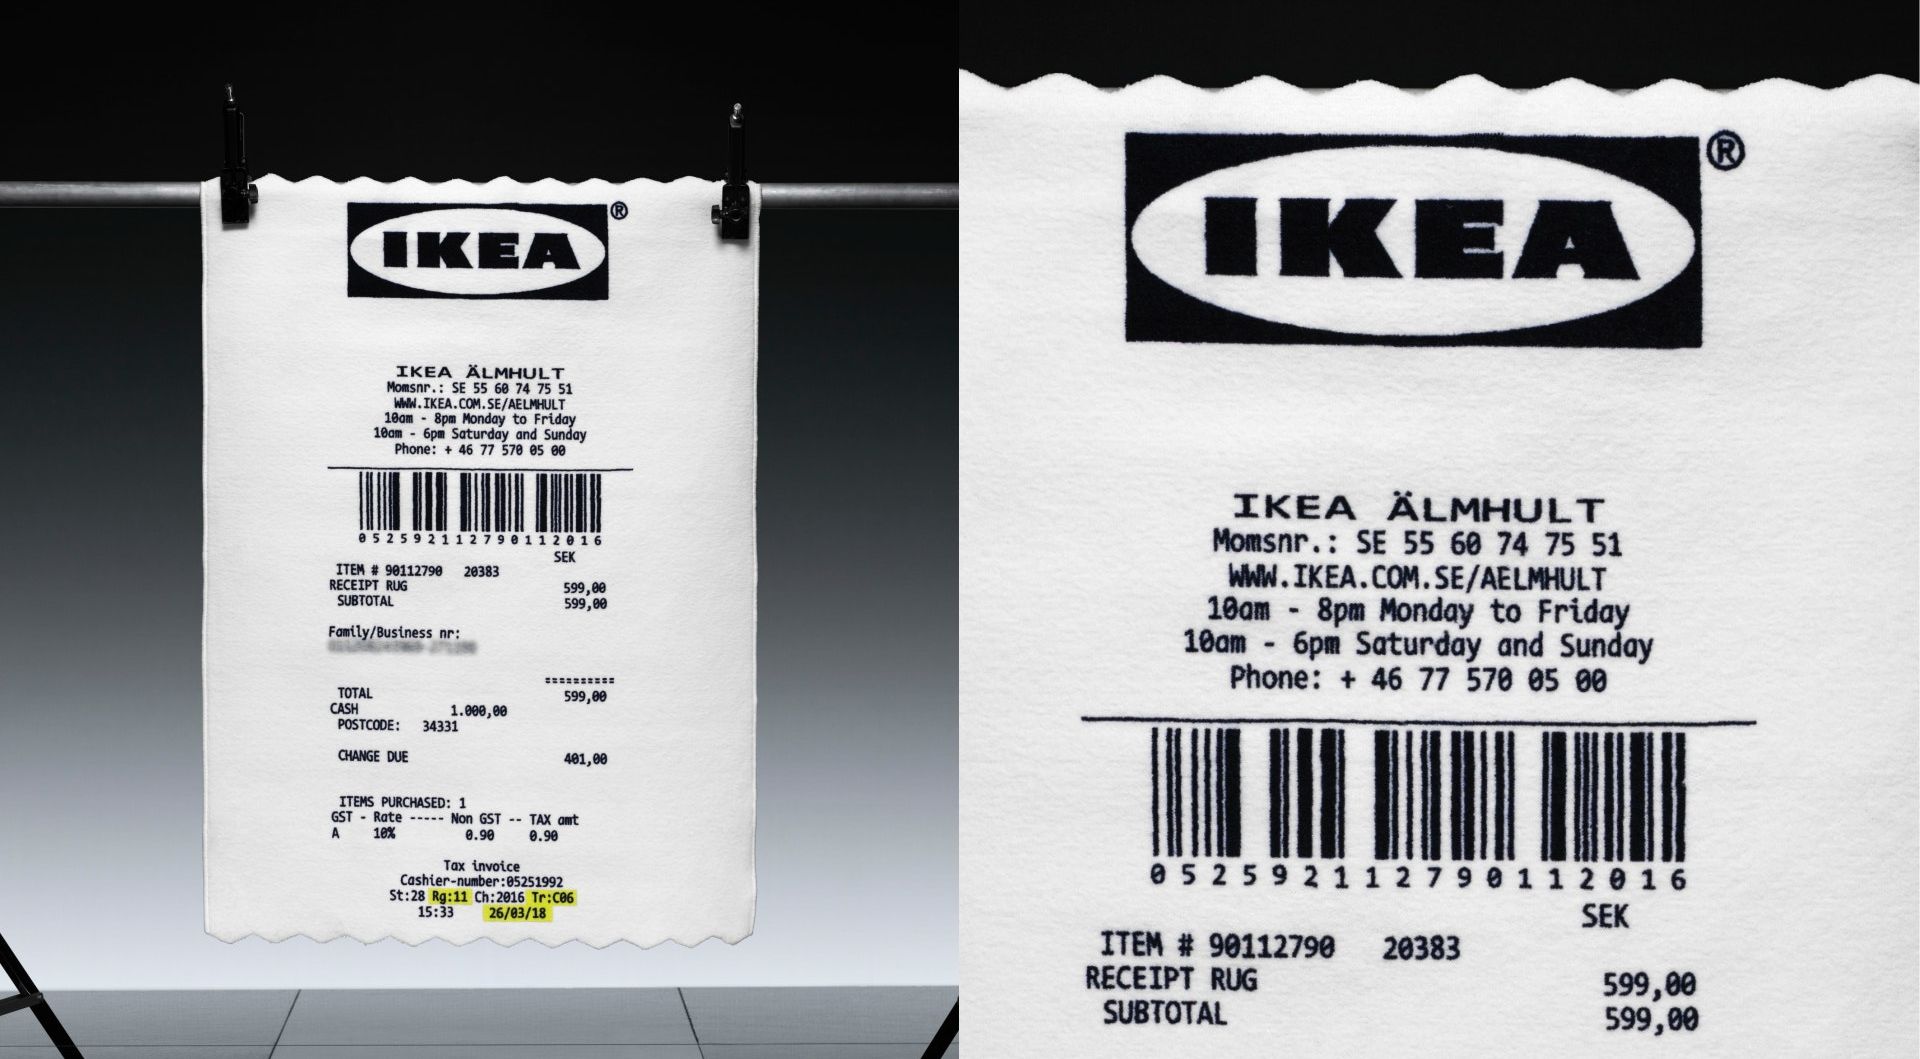 virgil abloh's IKEA collection includes a giant receipt rug and a